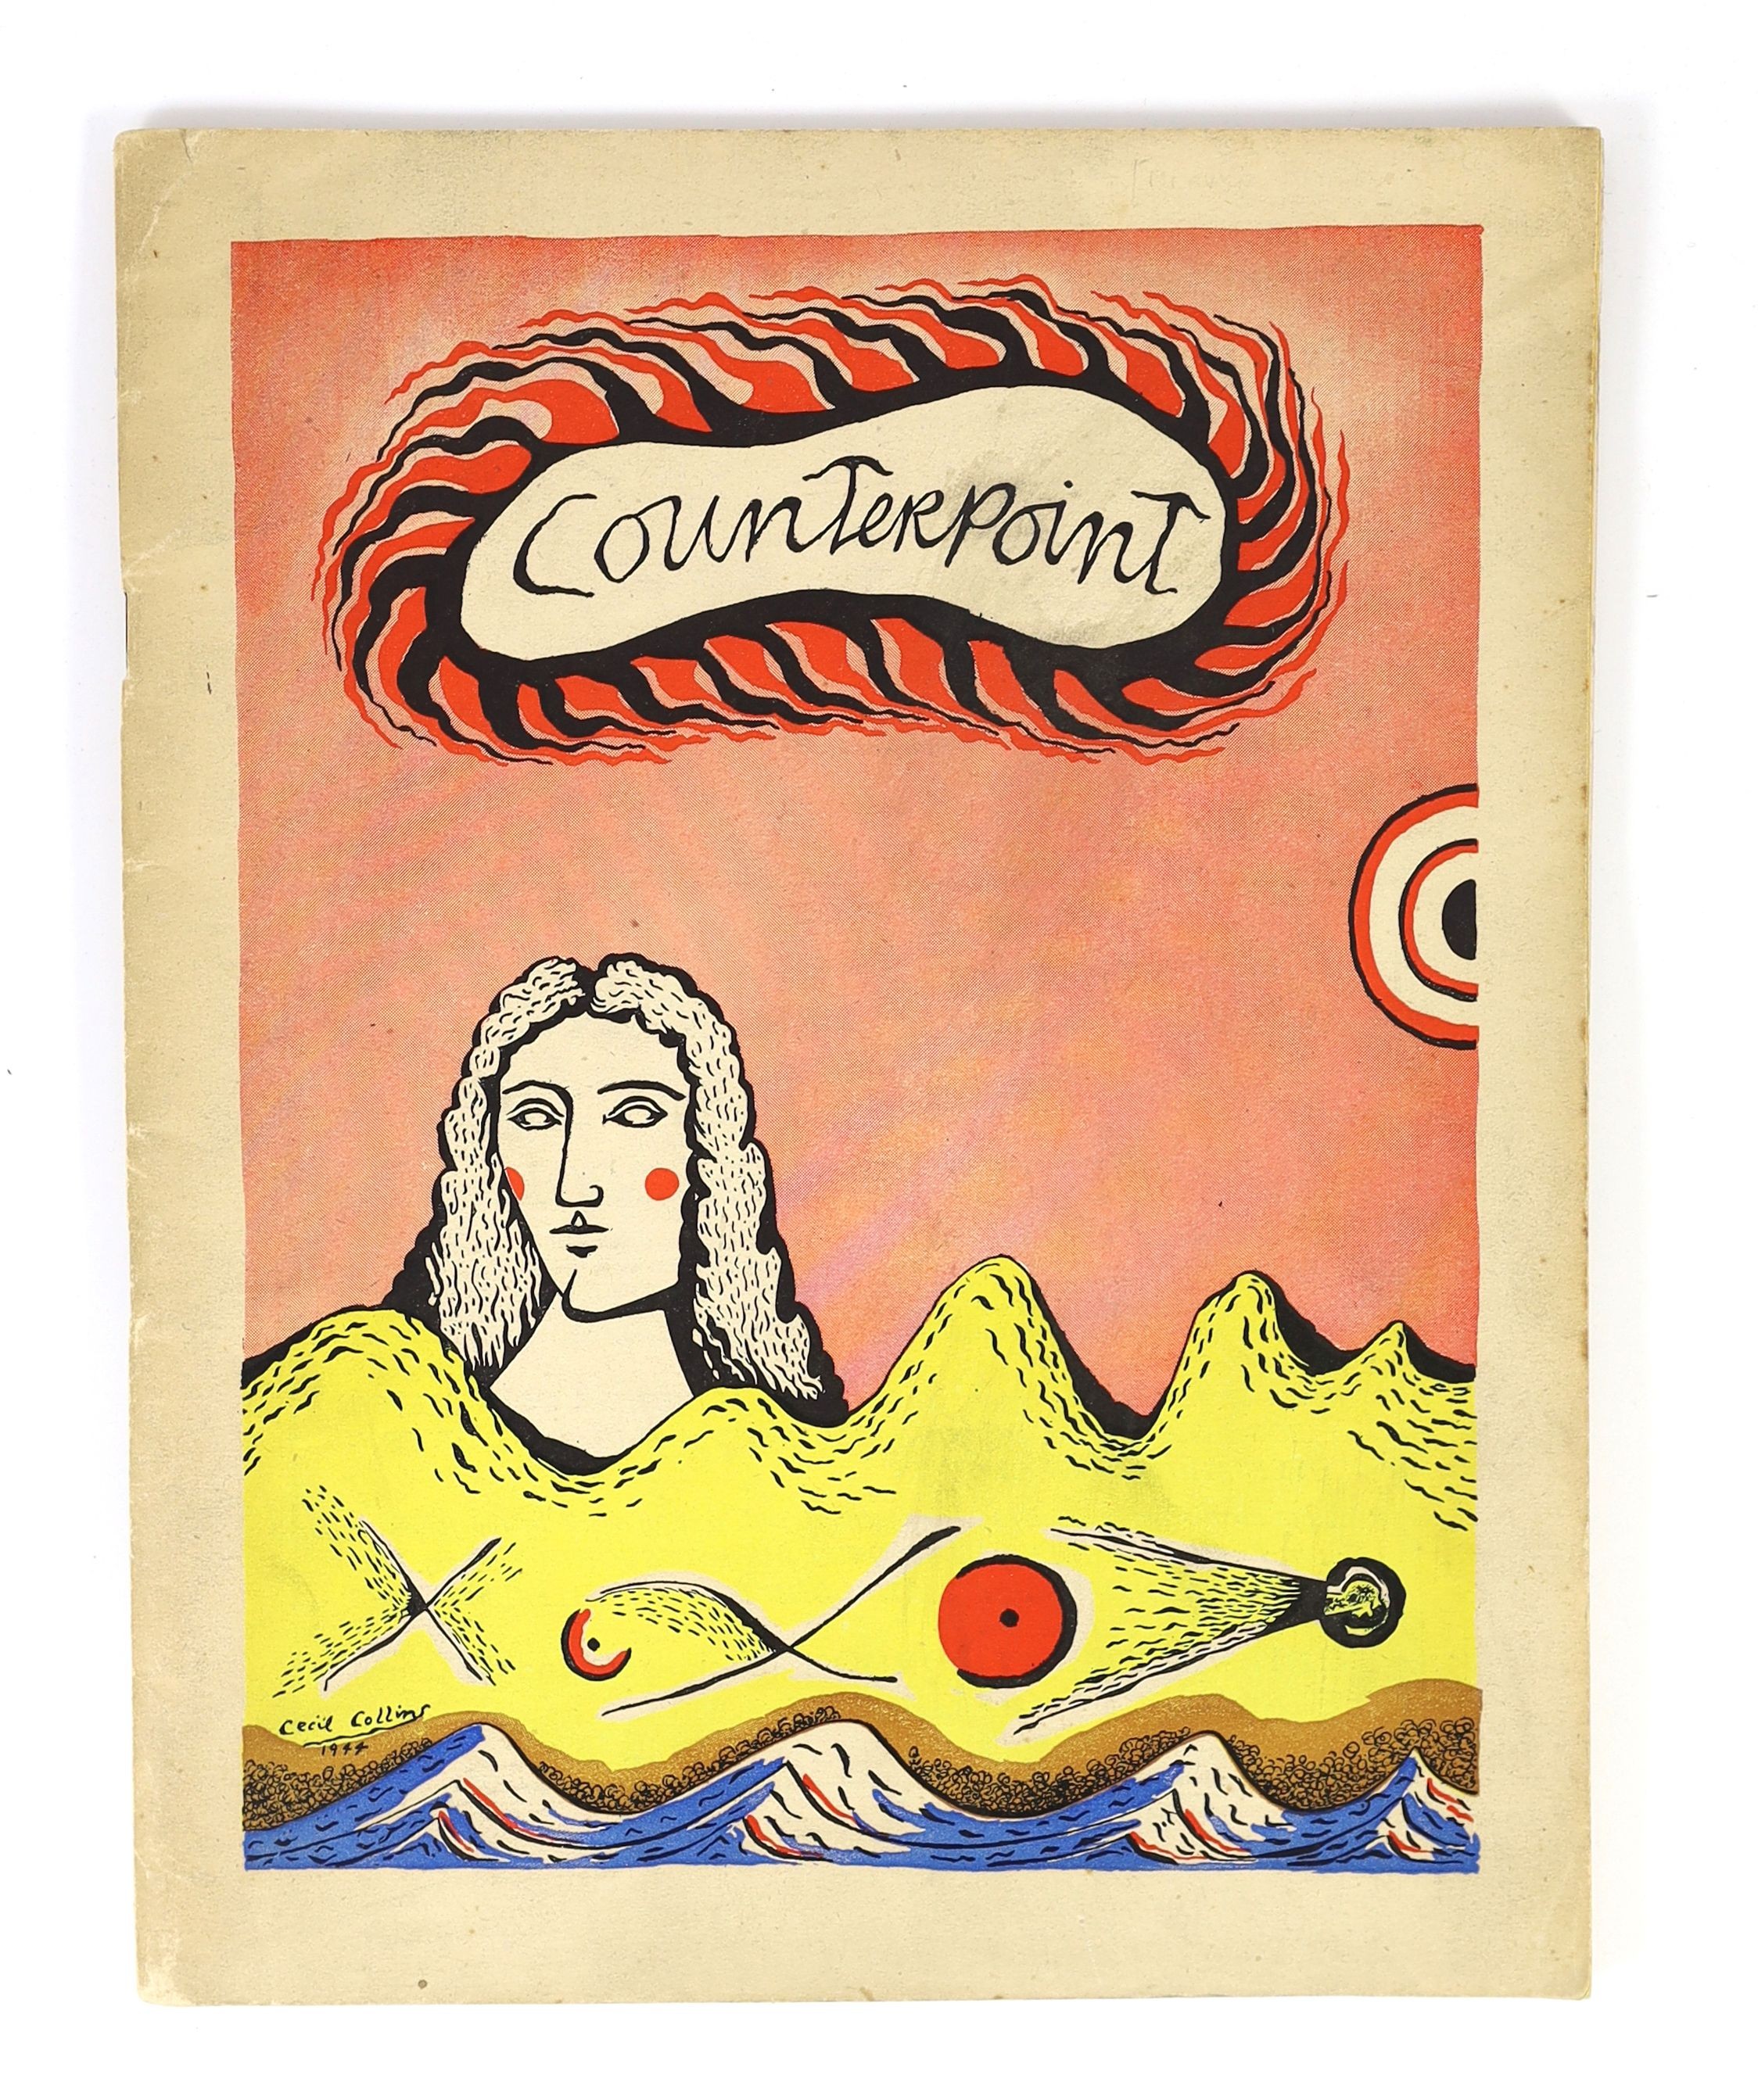 Senat, Conrad [Ed] - Counterpoint Volume 2. Adorned with numerous illustrations throughout. Original paper cover designed by Cecil Collins. Numerous advertisements to ends. 4to. Counterpoint Publications, Oxford, 1944.